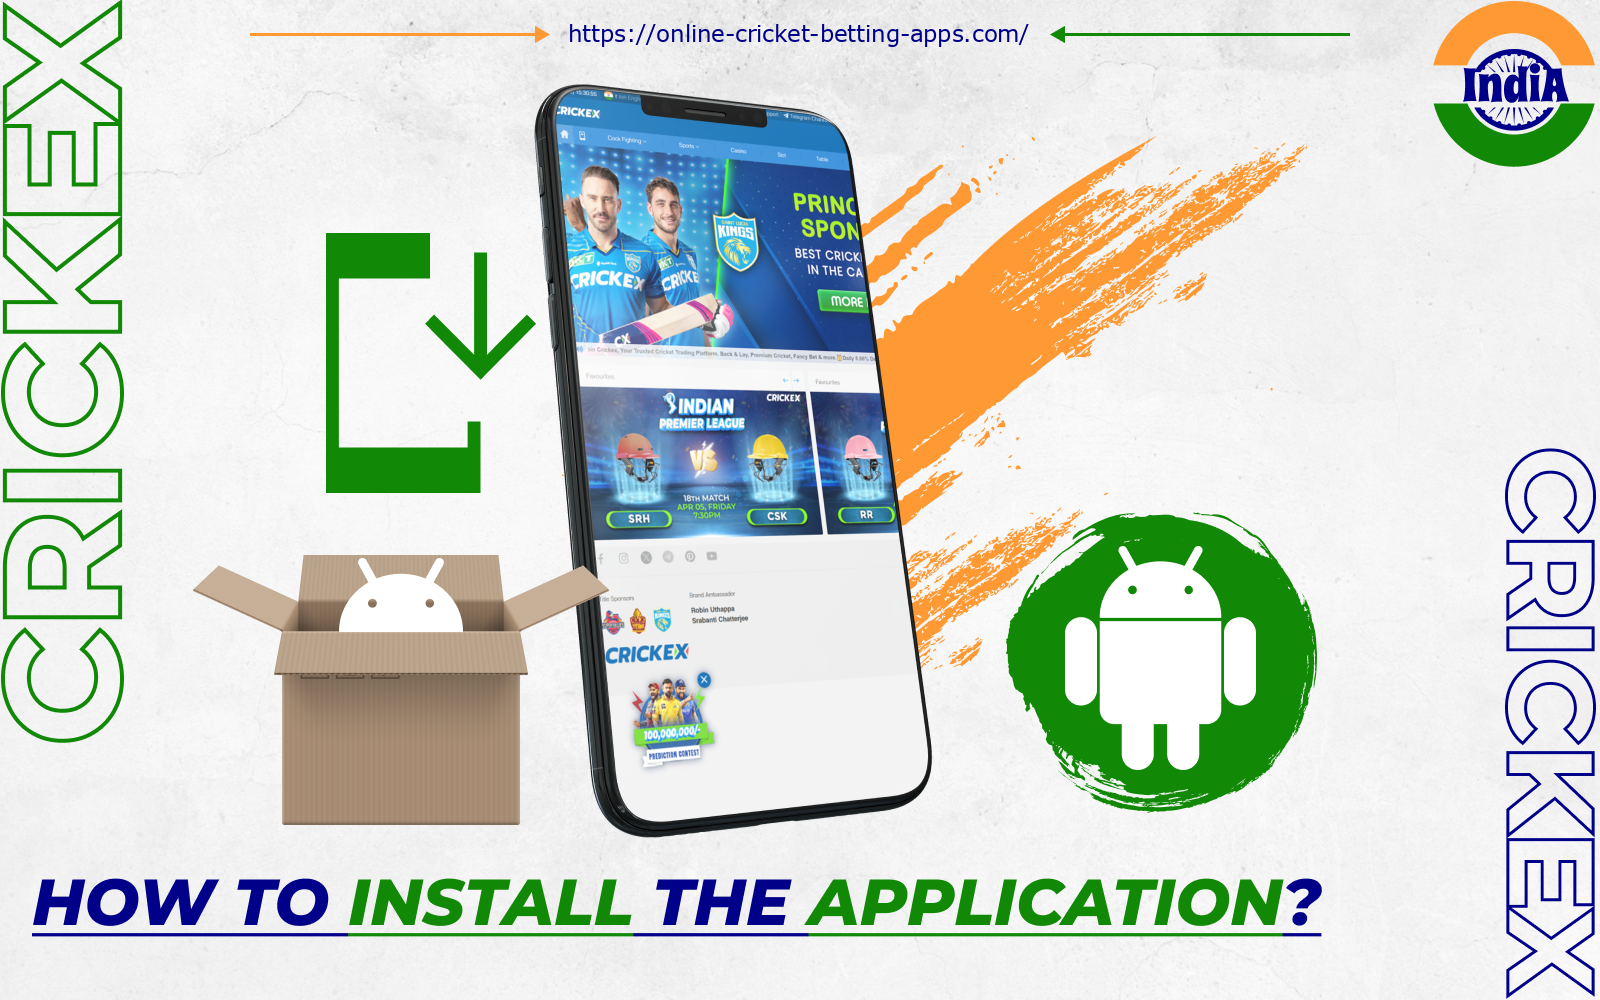 After downloading the Crickex apk for Android, players from India can proceed to install the app